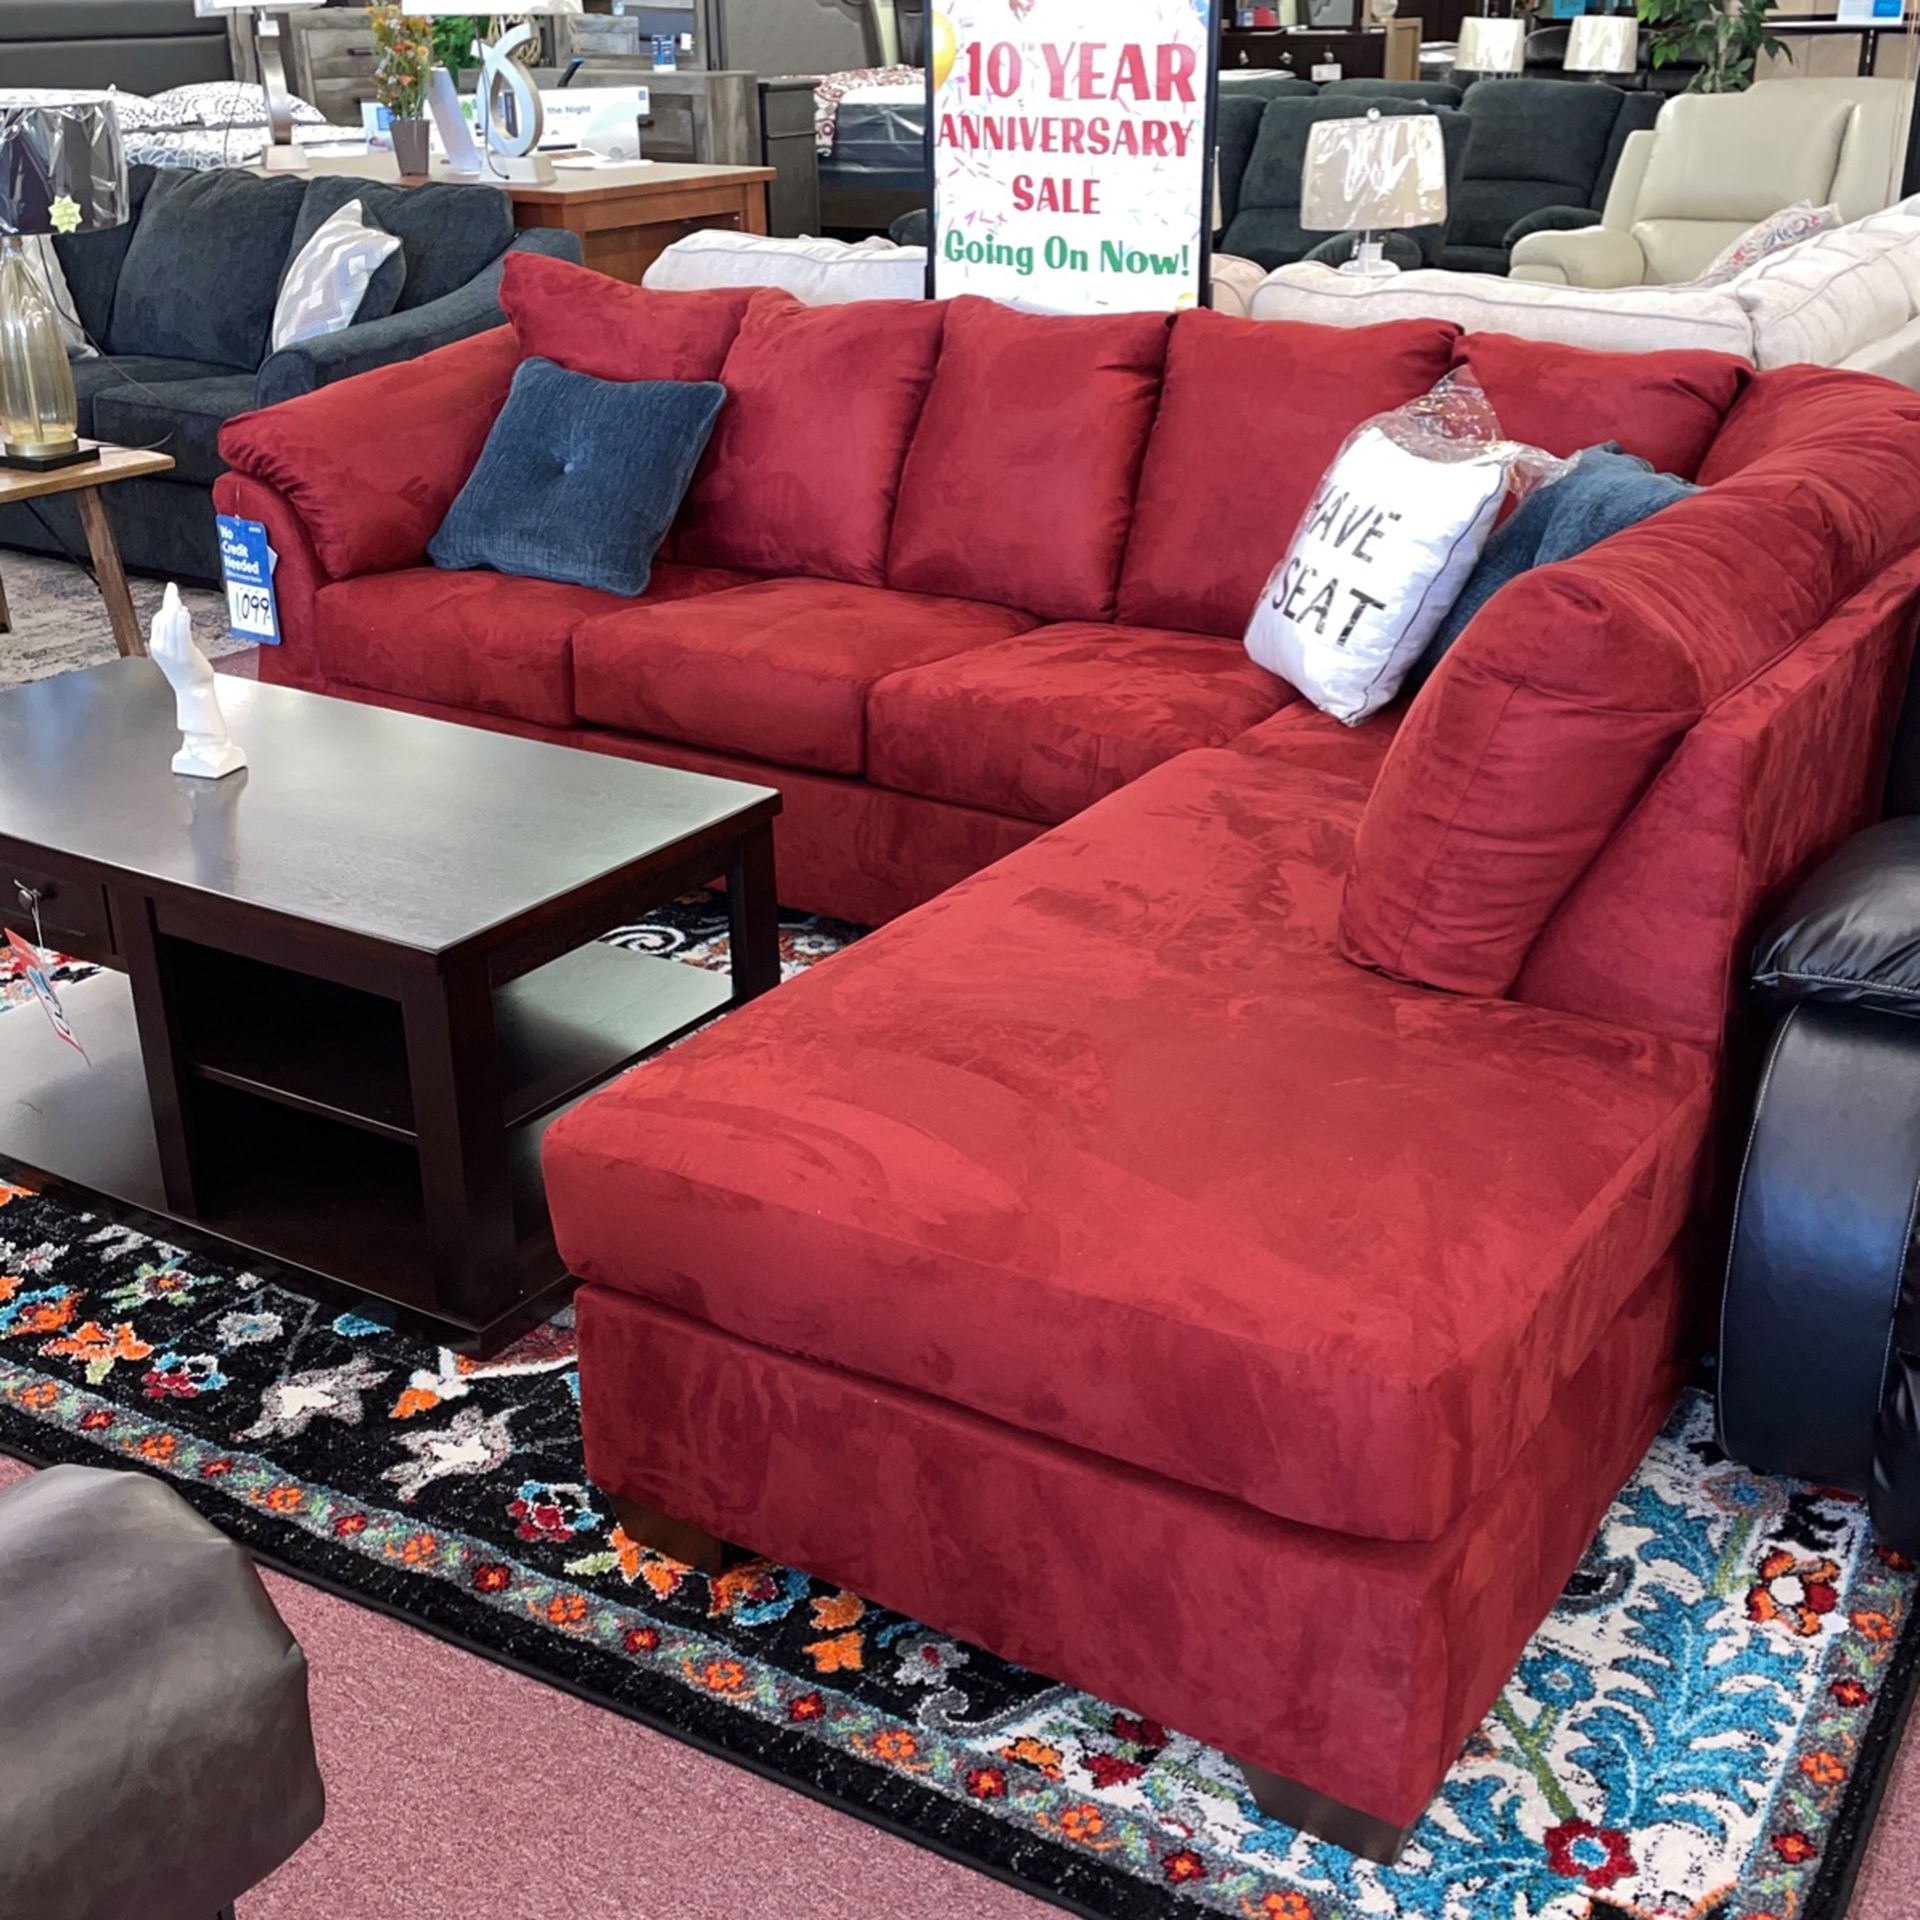 🇺🇸HUGE Ashley Furniture Blowout Sale!🇺🇸 Brand New Red Microfiber Sectional! $50 Down Takes It Home Today! 